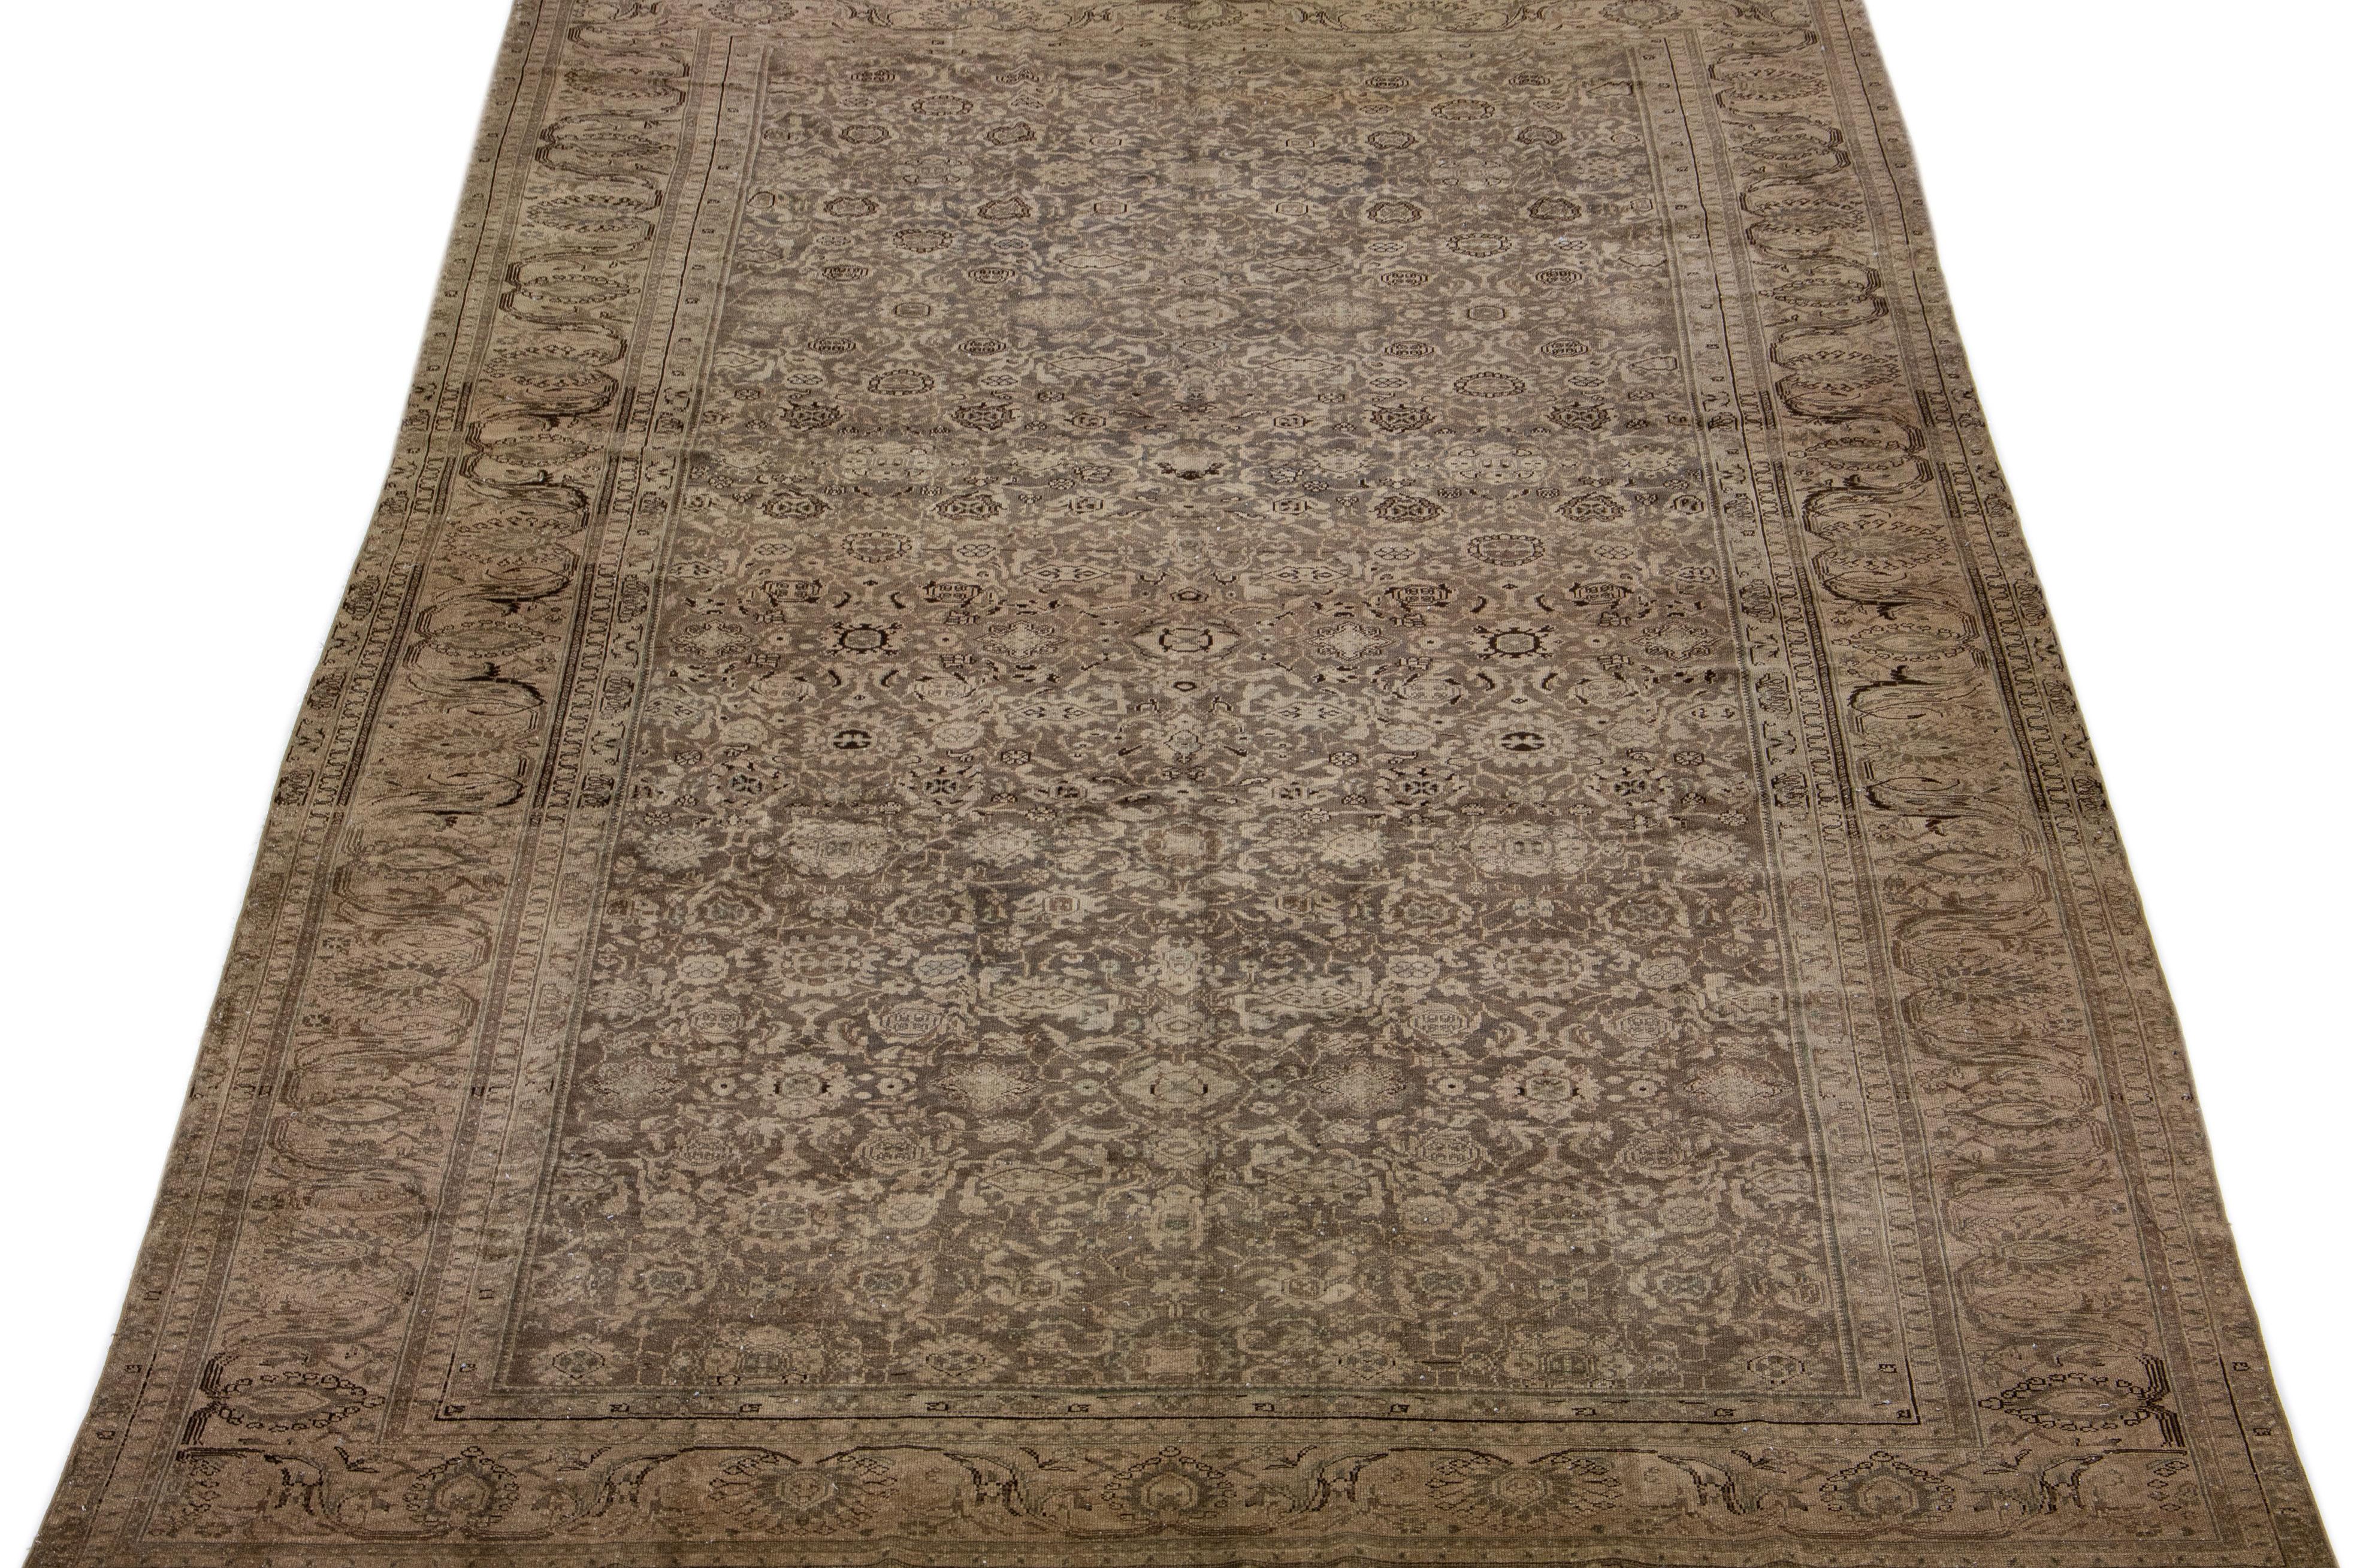 This antique Tabriz rug boasts a brown color field and features exquisite, hand knotted wool construction complemented by hints of blue in an all-over floral pattern.

This rug measures: 10'6